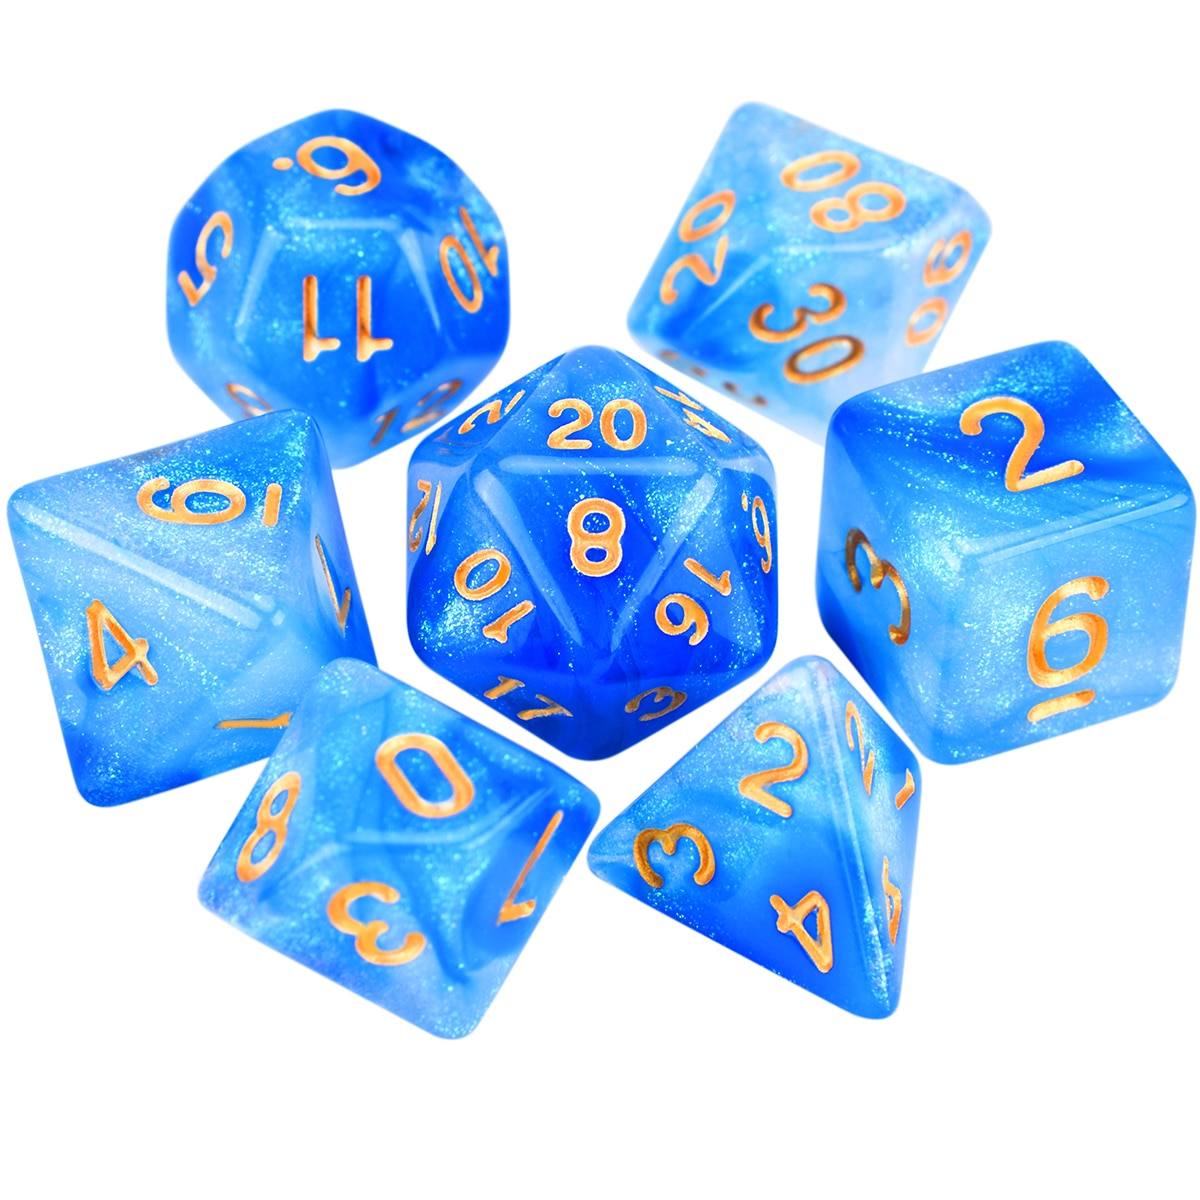 Vibrant and Bold Galaxy DND Polyhedral Dice 7 Set